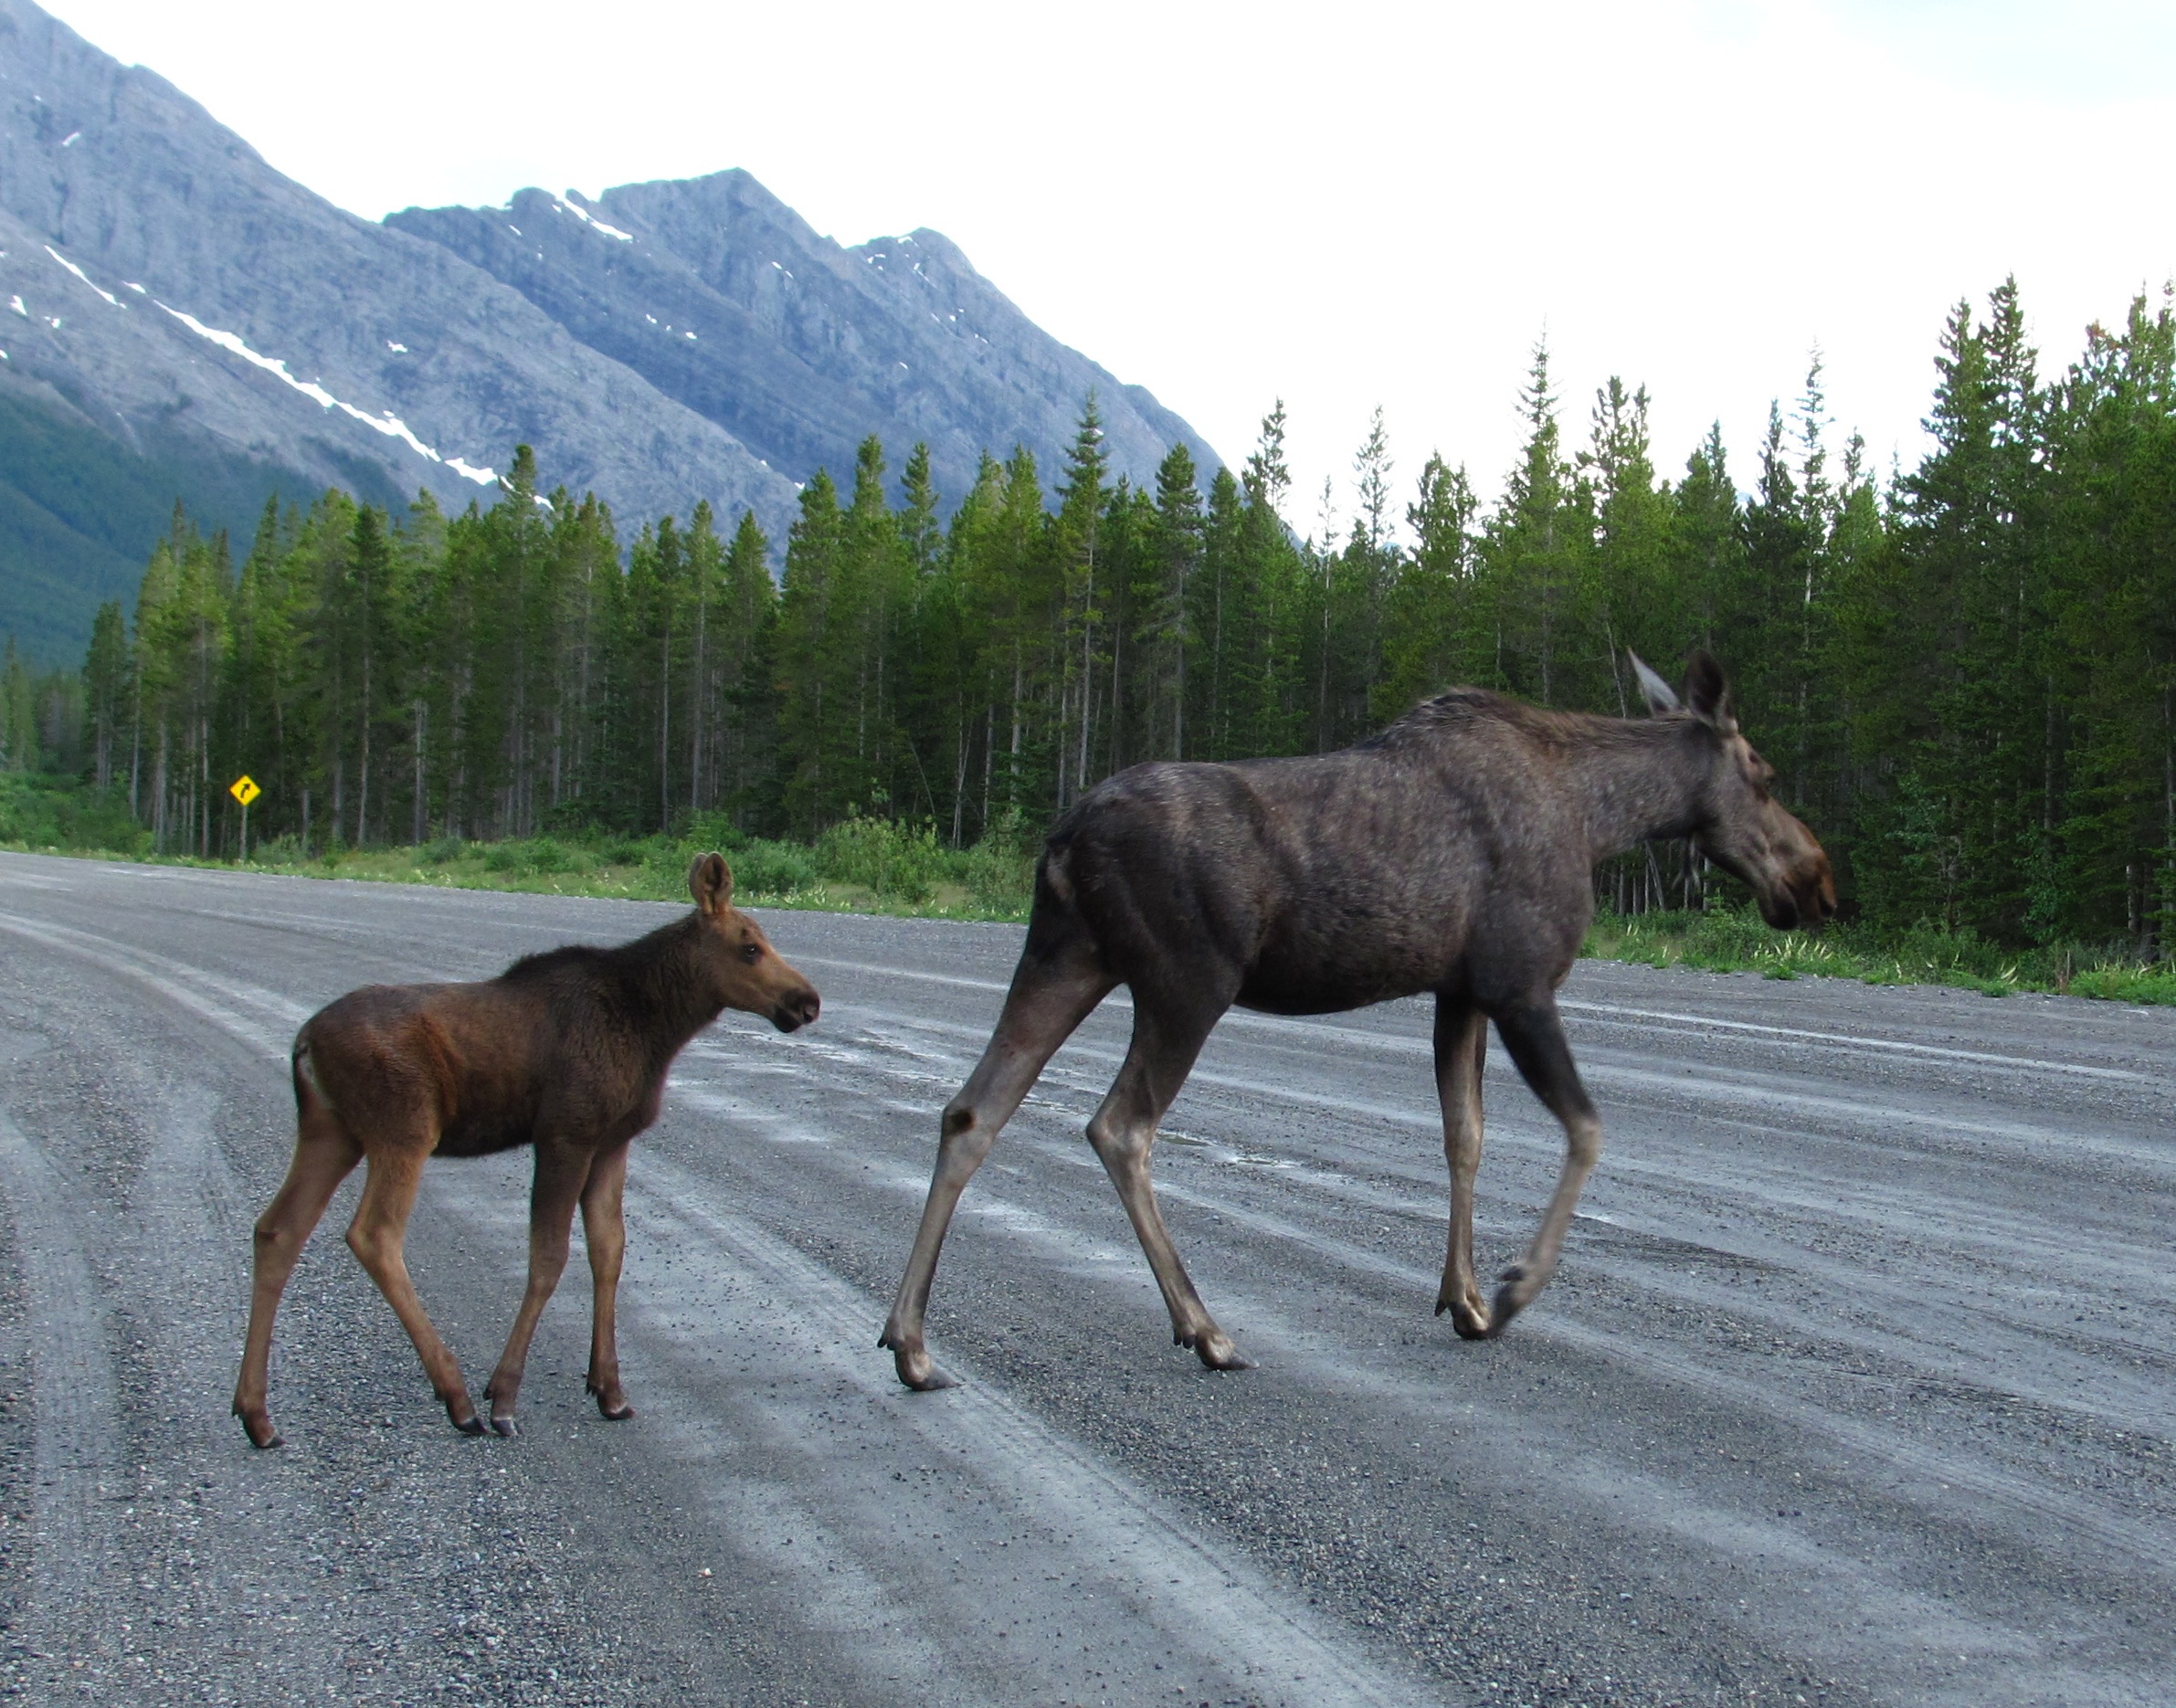 moose_mother_and_calf_on_road.jpg